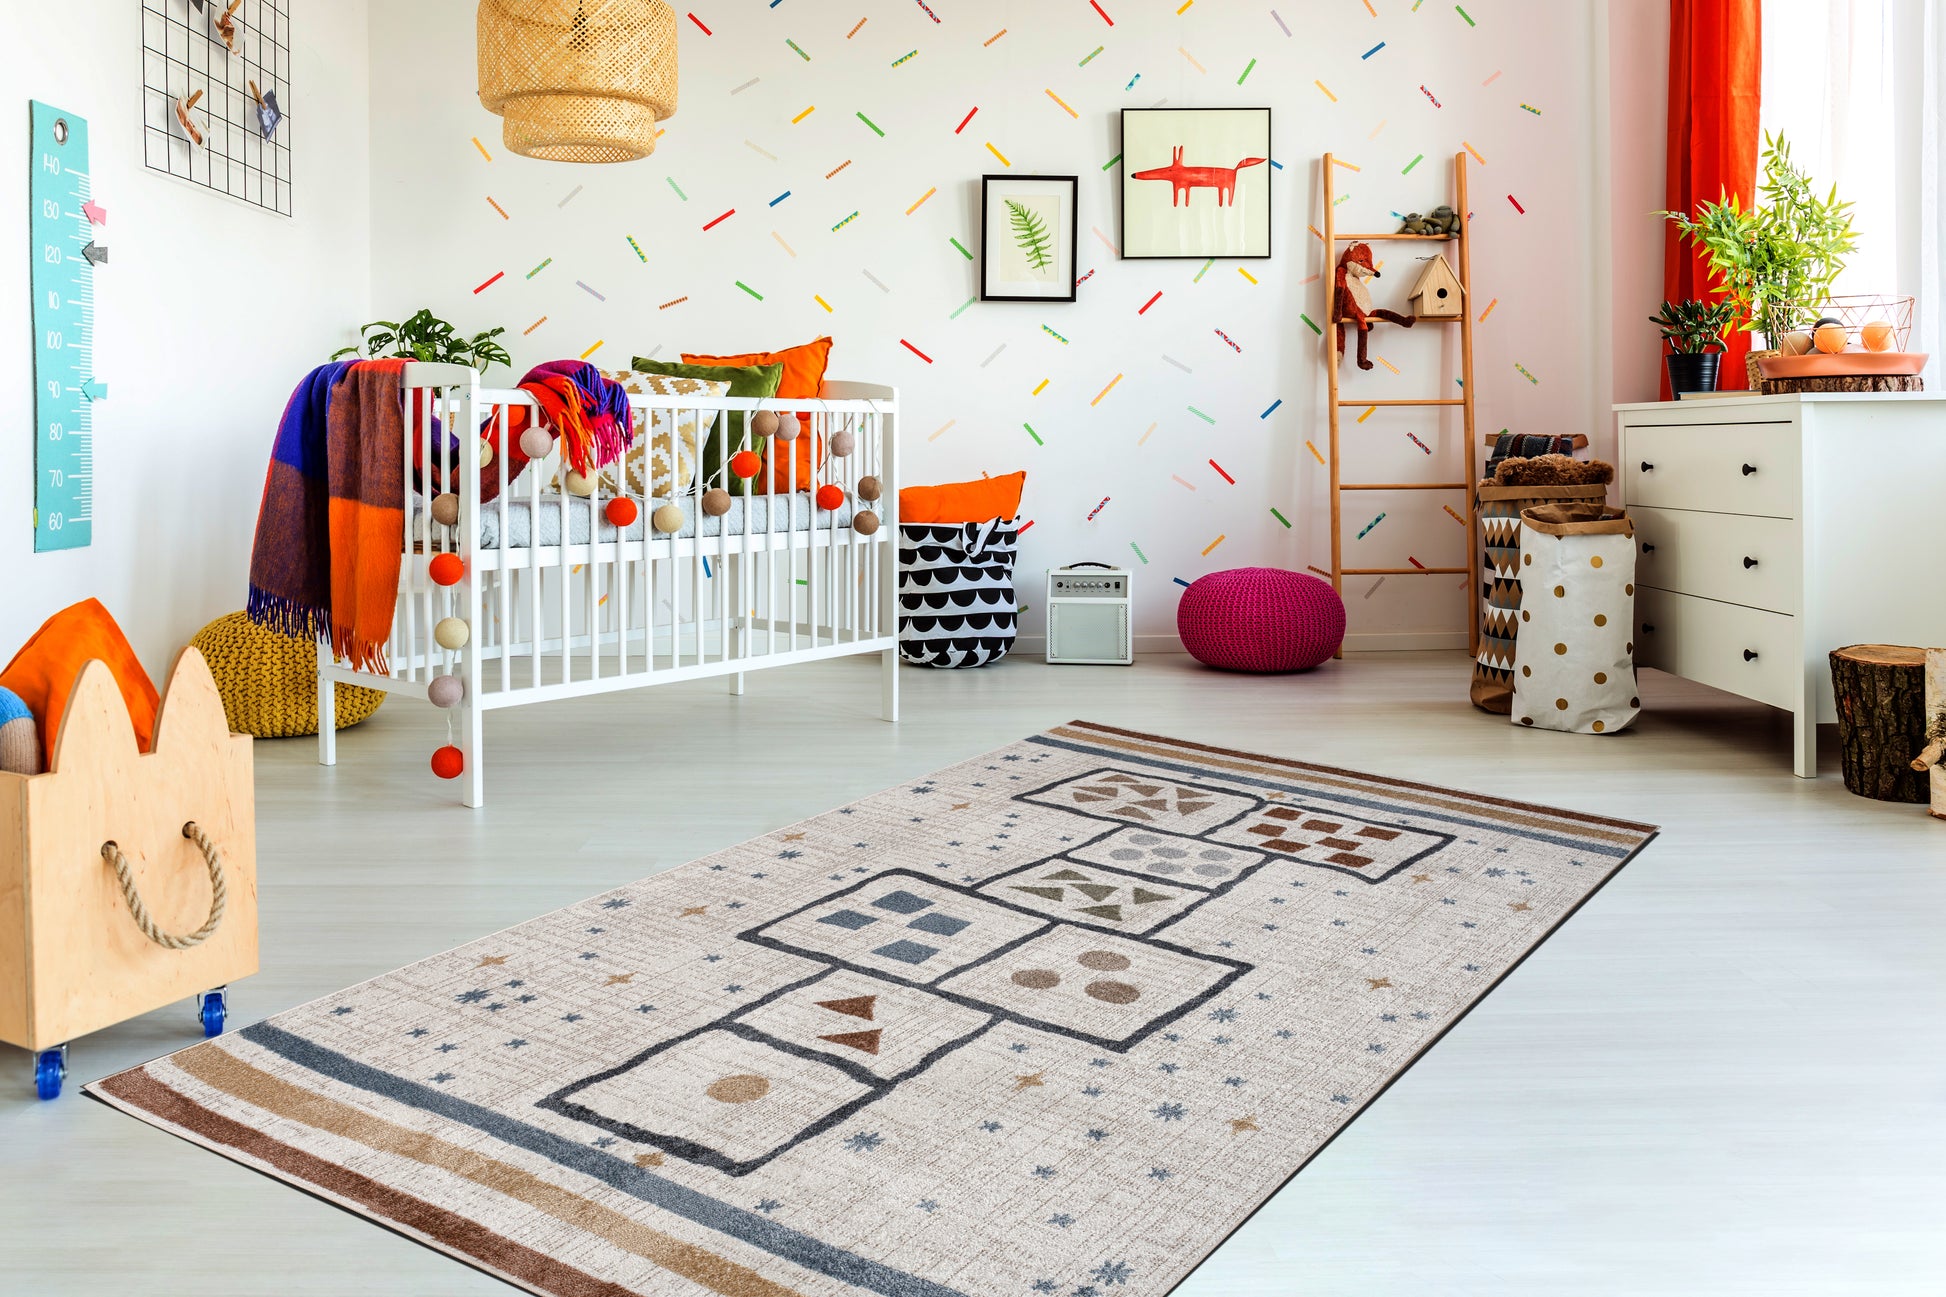 multicolor colorful machine washable hopscotch game kids nursery play room area rug 8x10, 8x11 ft Large Living Room Carpet, Bedroom, Kitchen